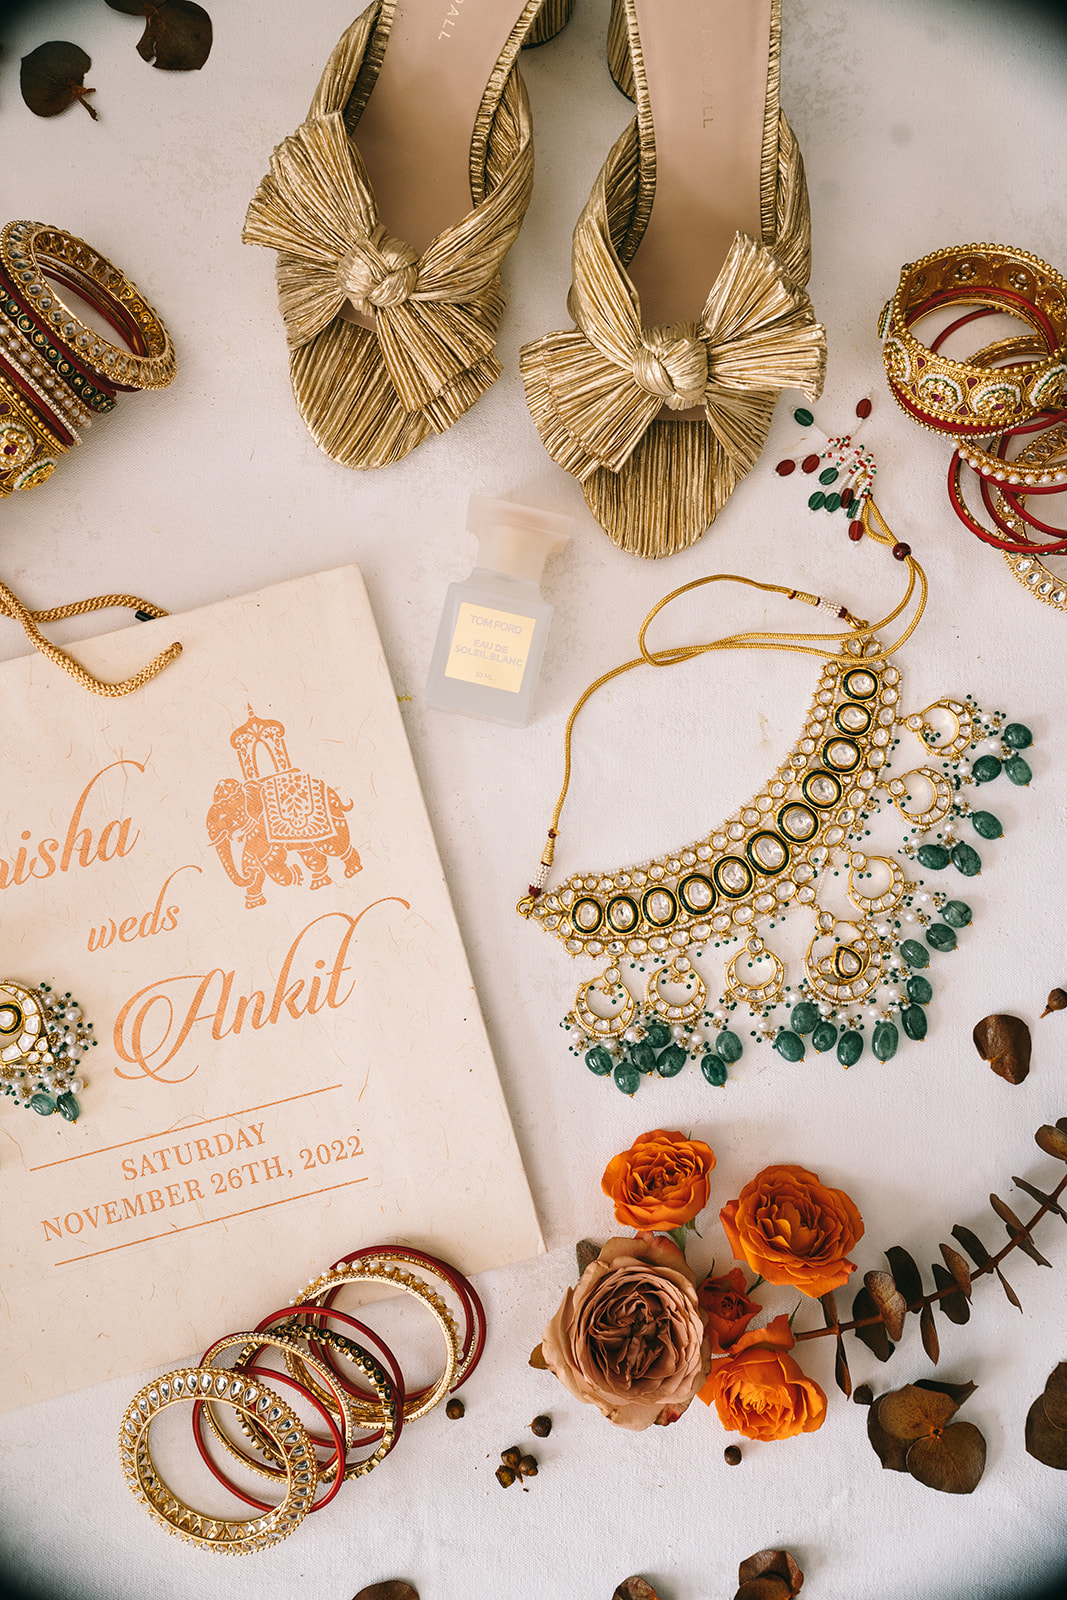 Flat lay with golden shoes, gold and green necklaces, red and gold bangles, orange roses, and a wedding invitation